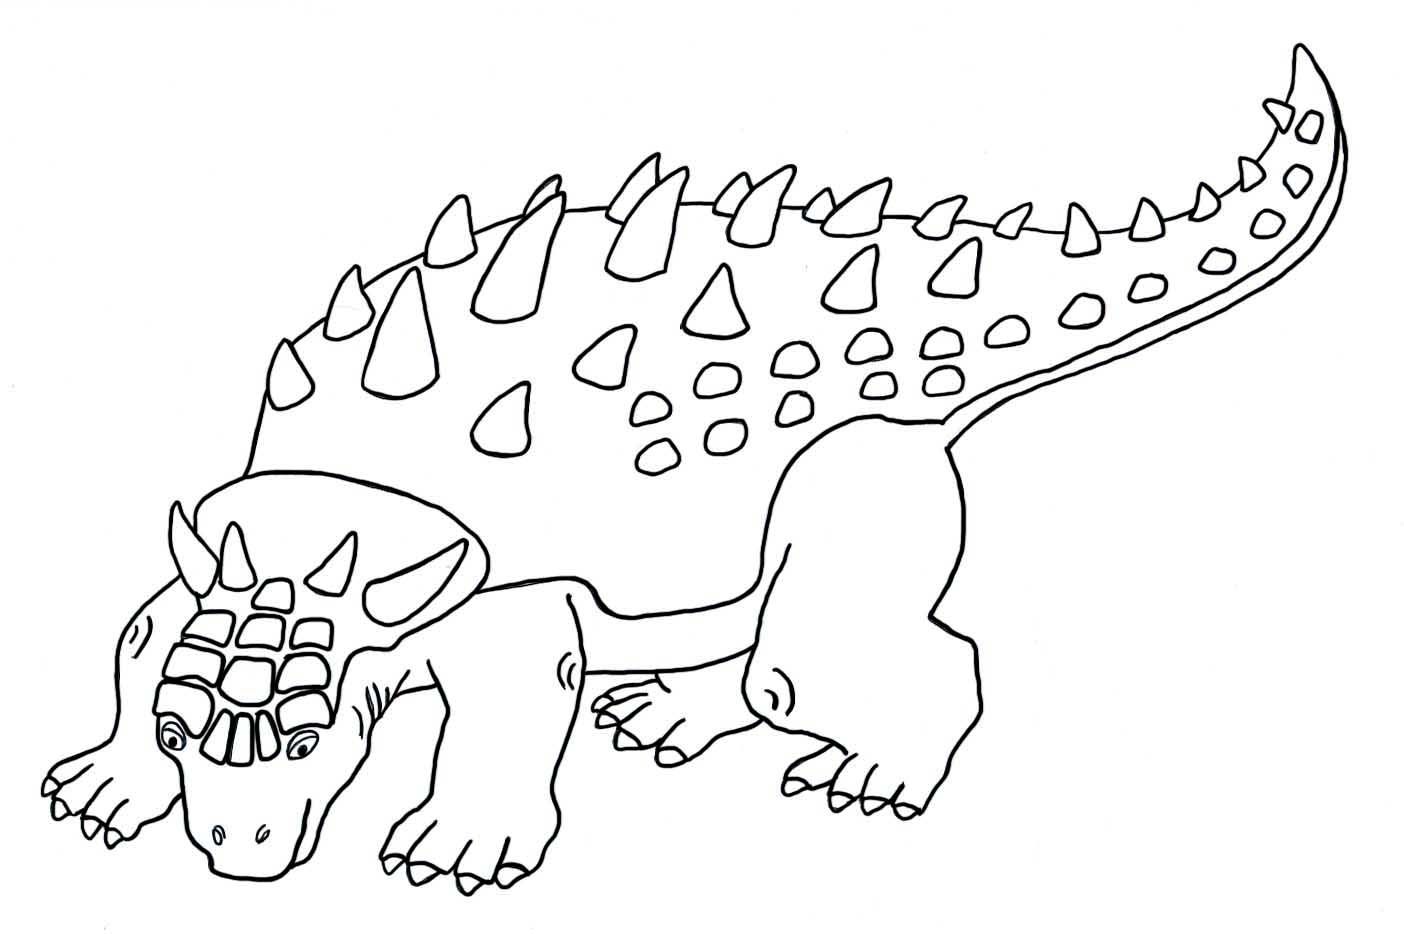 Coloring Pages : Amazing Dinosaur Coloring Sheets Image ...